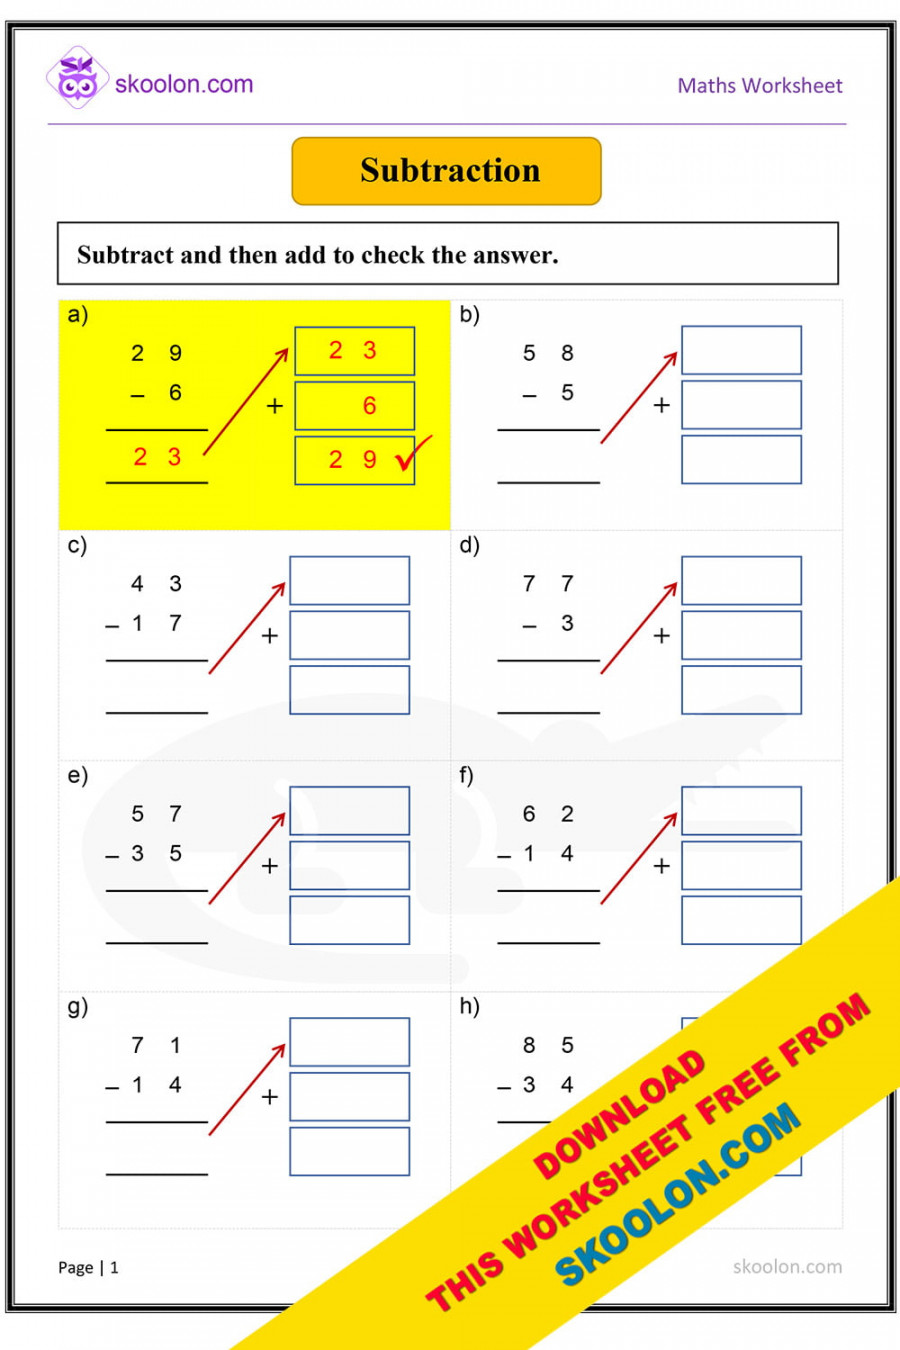 use-addition-to-check-subtraction-worksheets